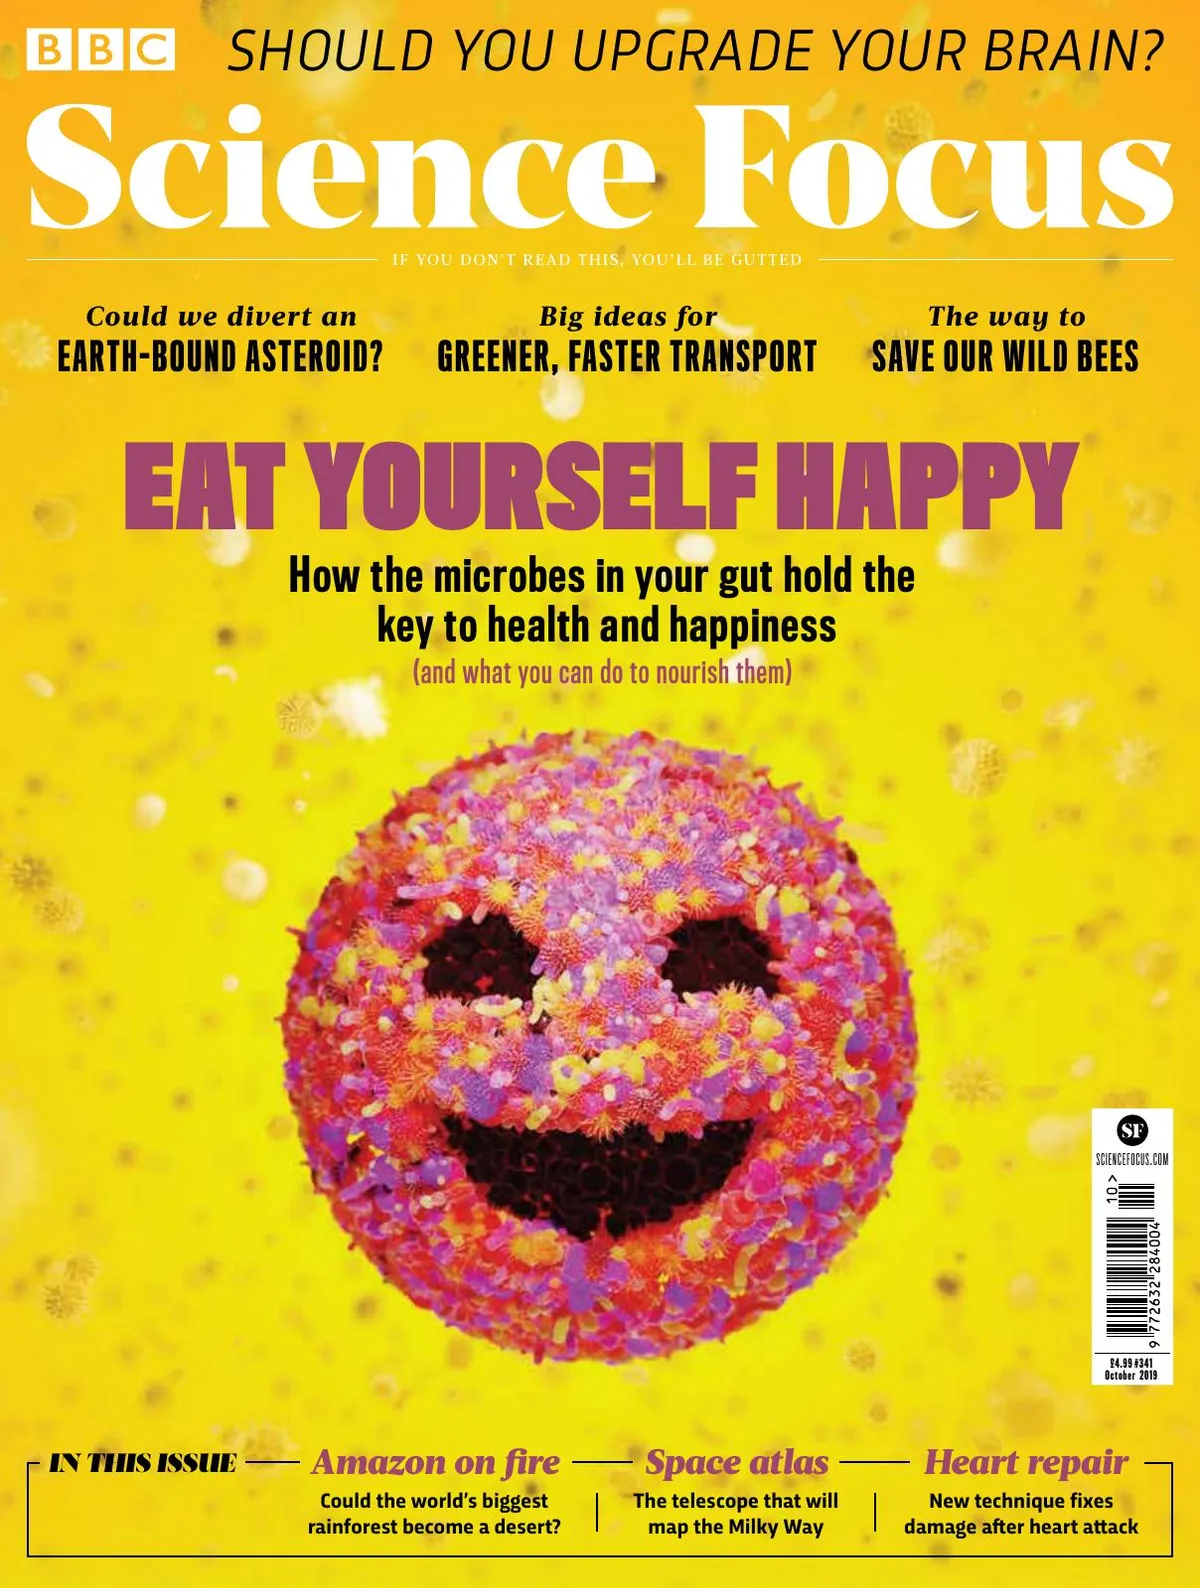 Eat yourself happy: How the microbes in your gut hold the key to health and happiness (and what you can do to nourish them) © Magic Torch